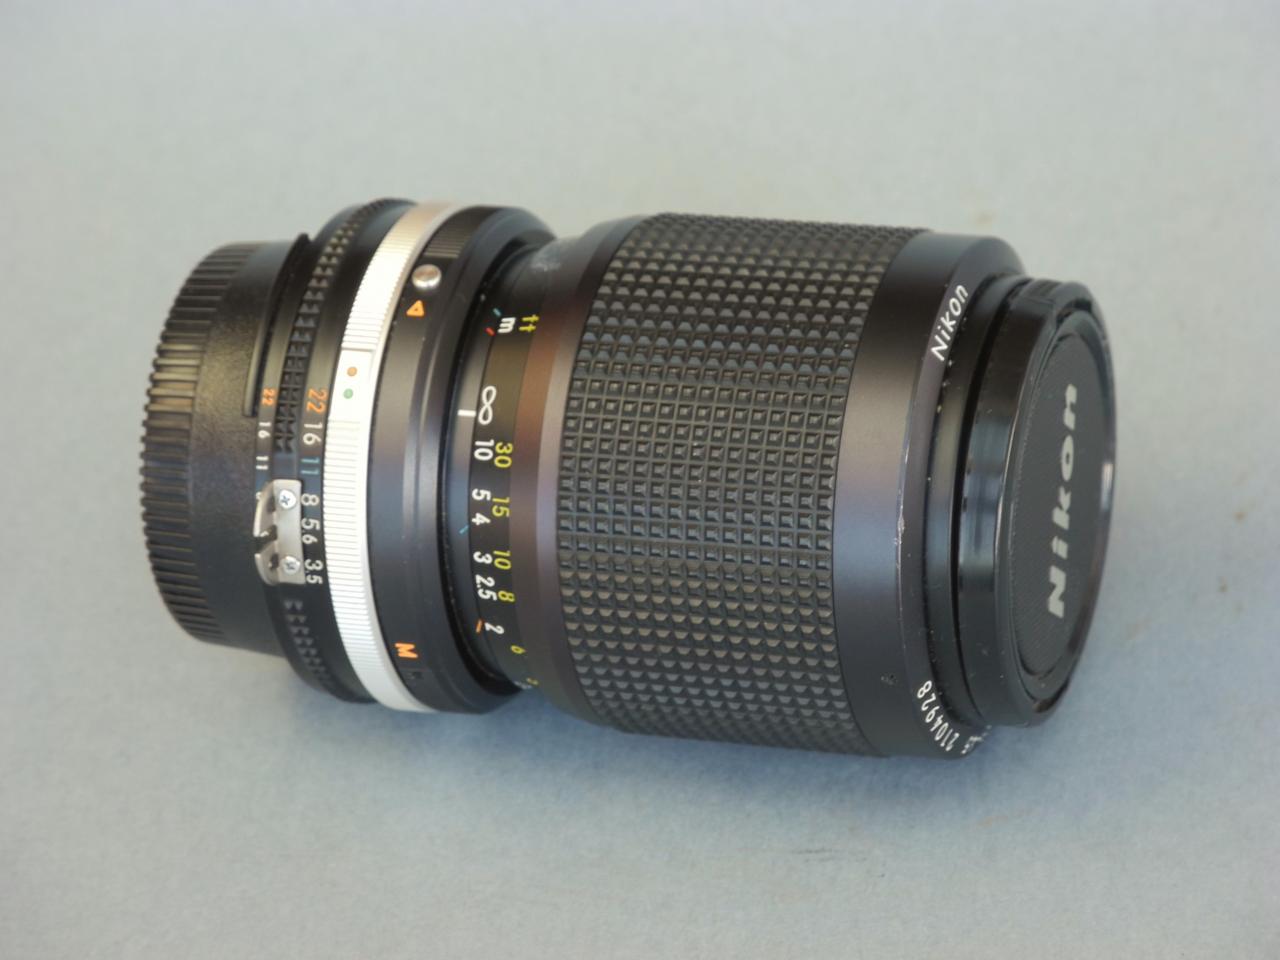 *Objectif Nikkor AIS Zoom  f/3.5-4.5  35-105 mm*